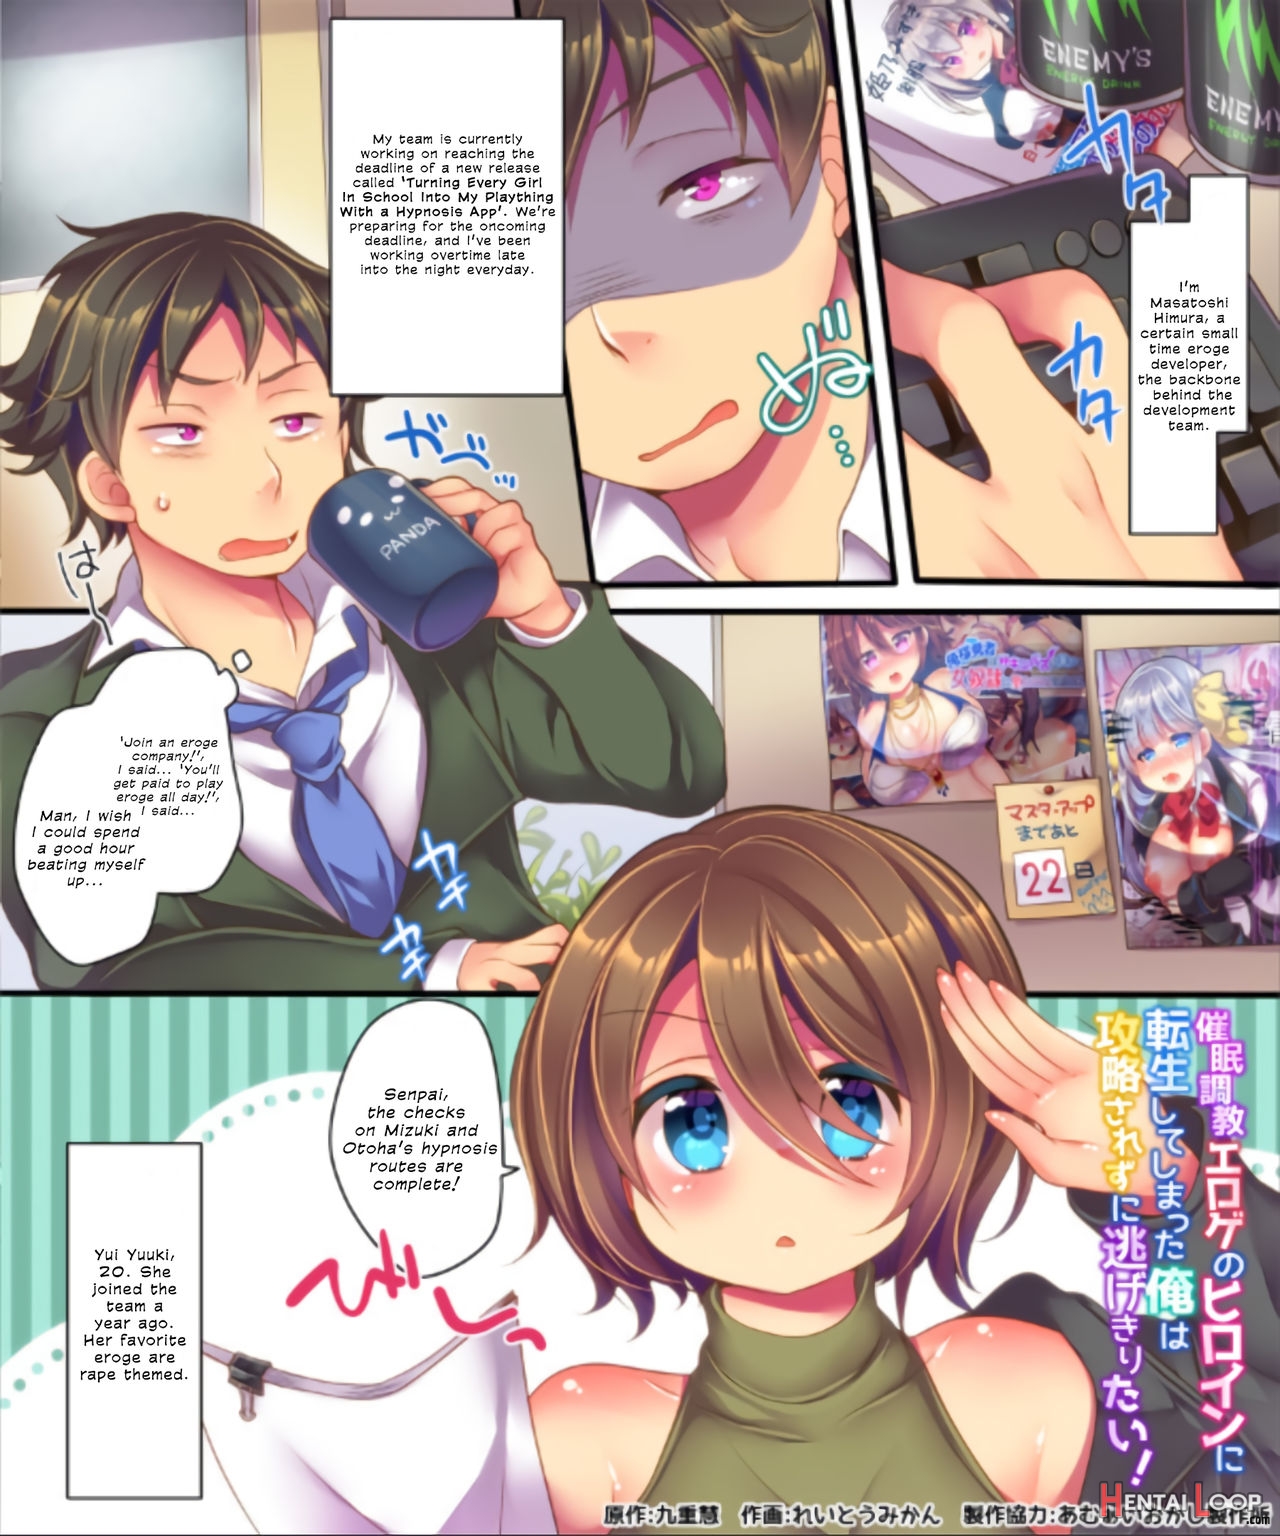 Reborn As A Heroine In A Hypnosis Mindbreak Eroge: I Need To Get Out Of Here Before I Get Raped! page 2